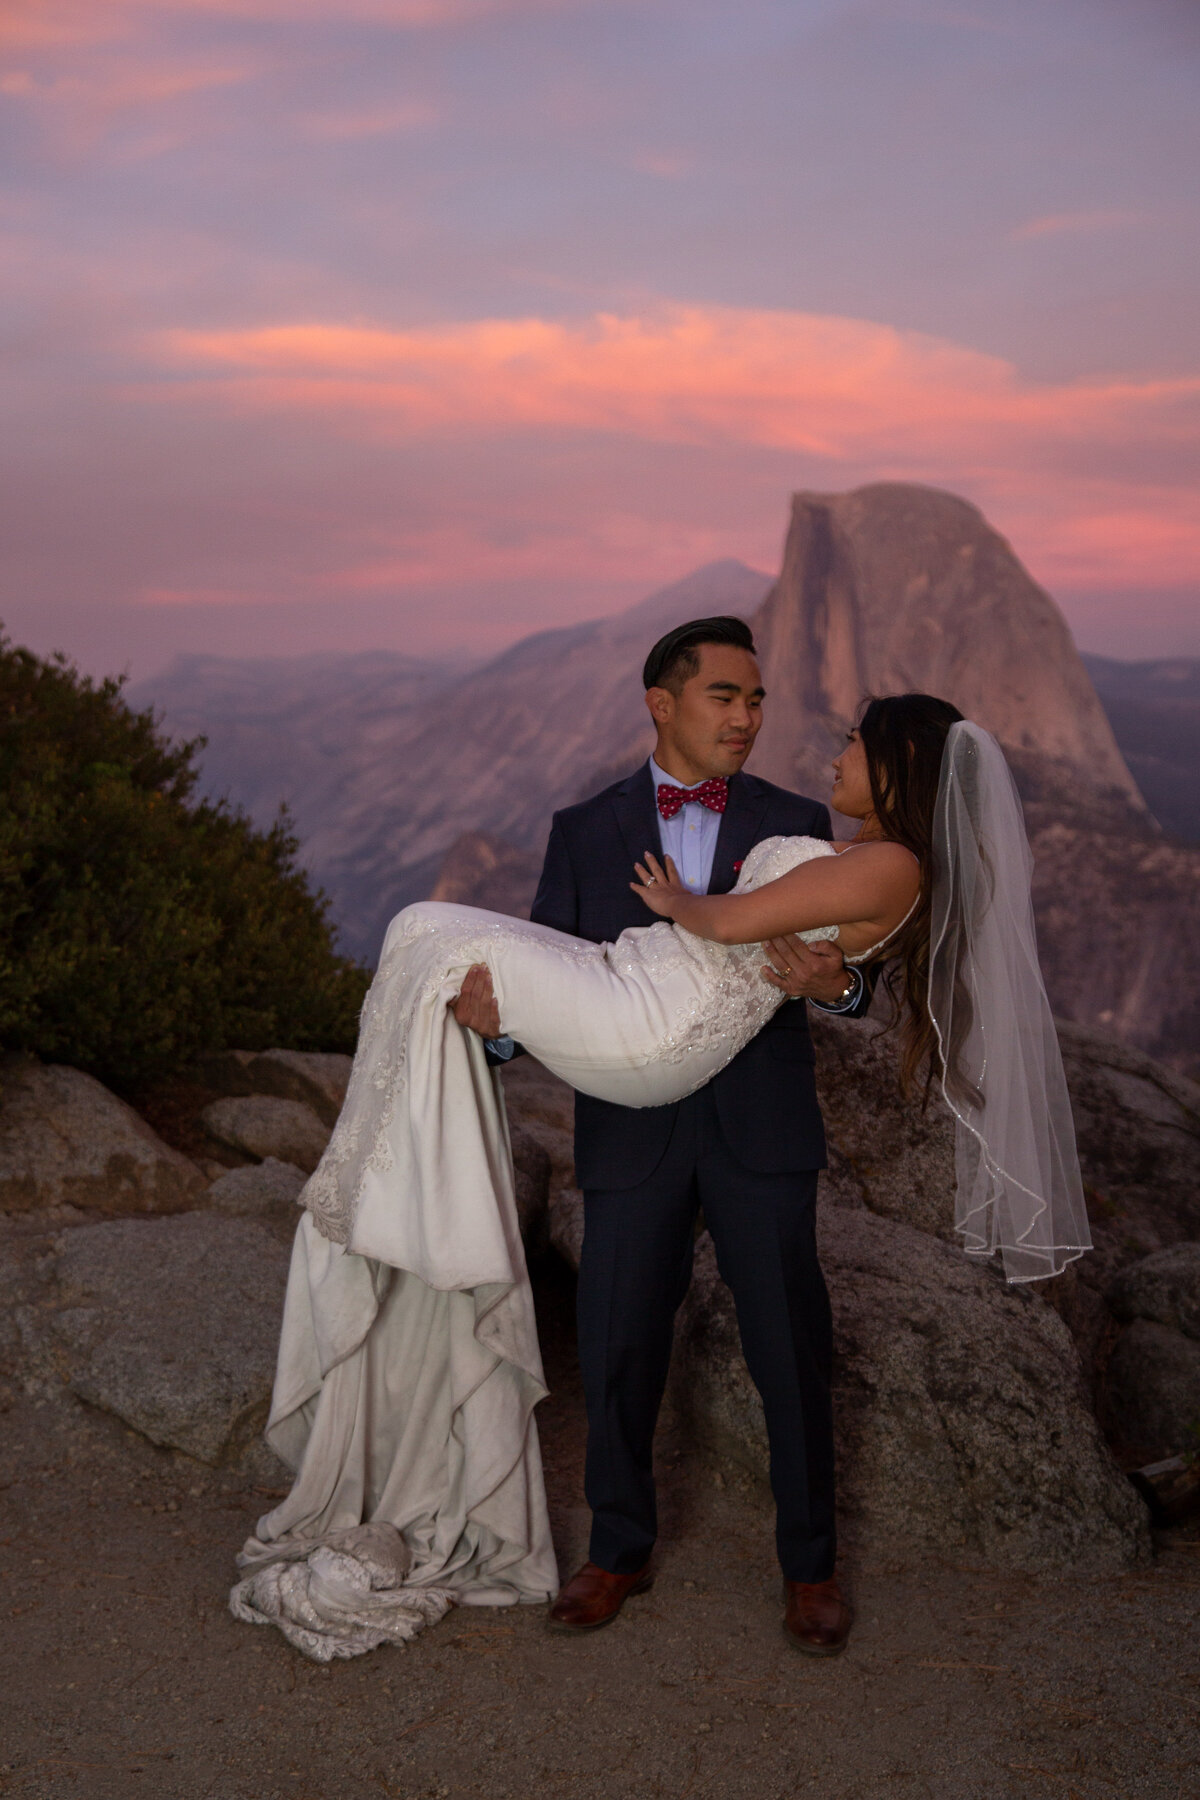 A groom stands holding his bride in his arms as her veil hangs behind her and the sunsets making the sky a beautiful pink color.